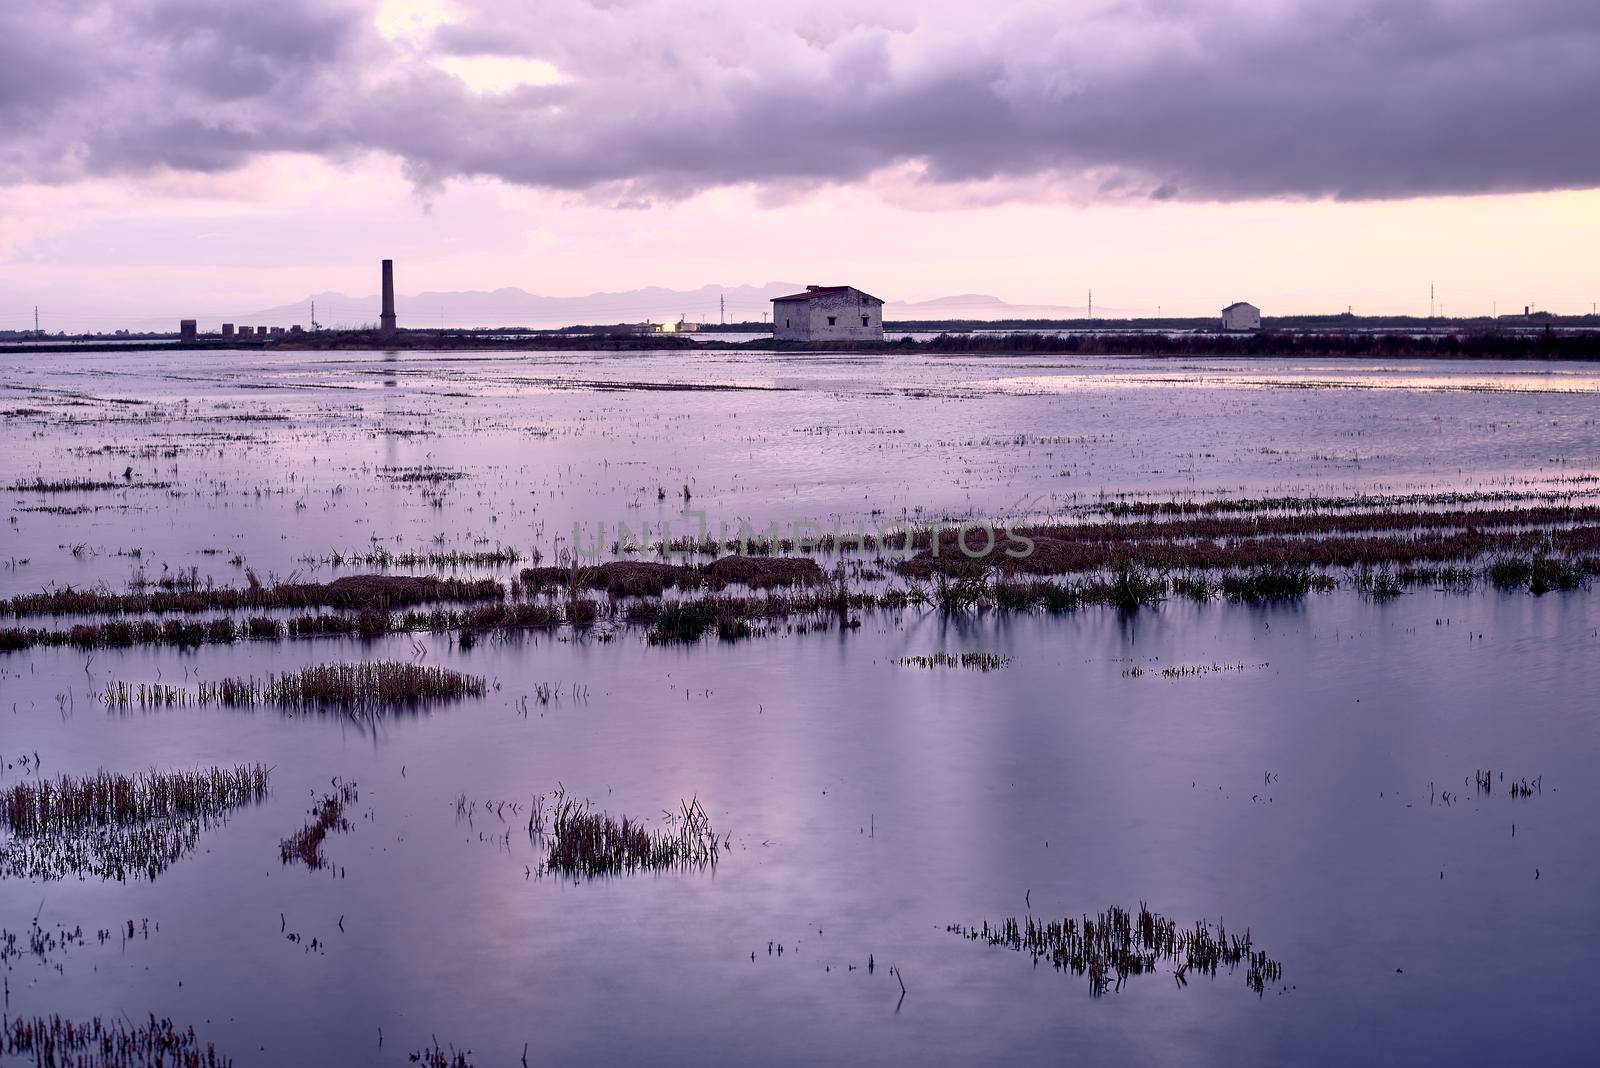 Flooded rice field for sowing with clouds, Albufera Valencia, storm, sunset, typical houses, solitary. Grey sky